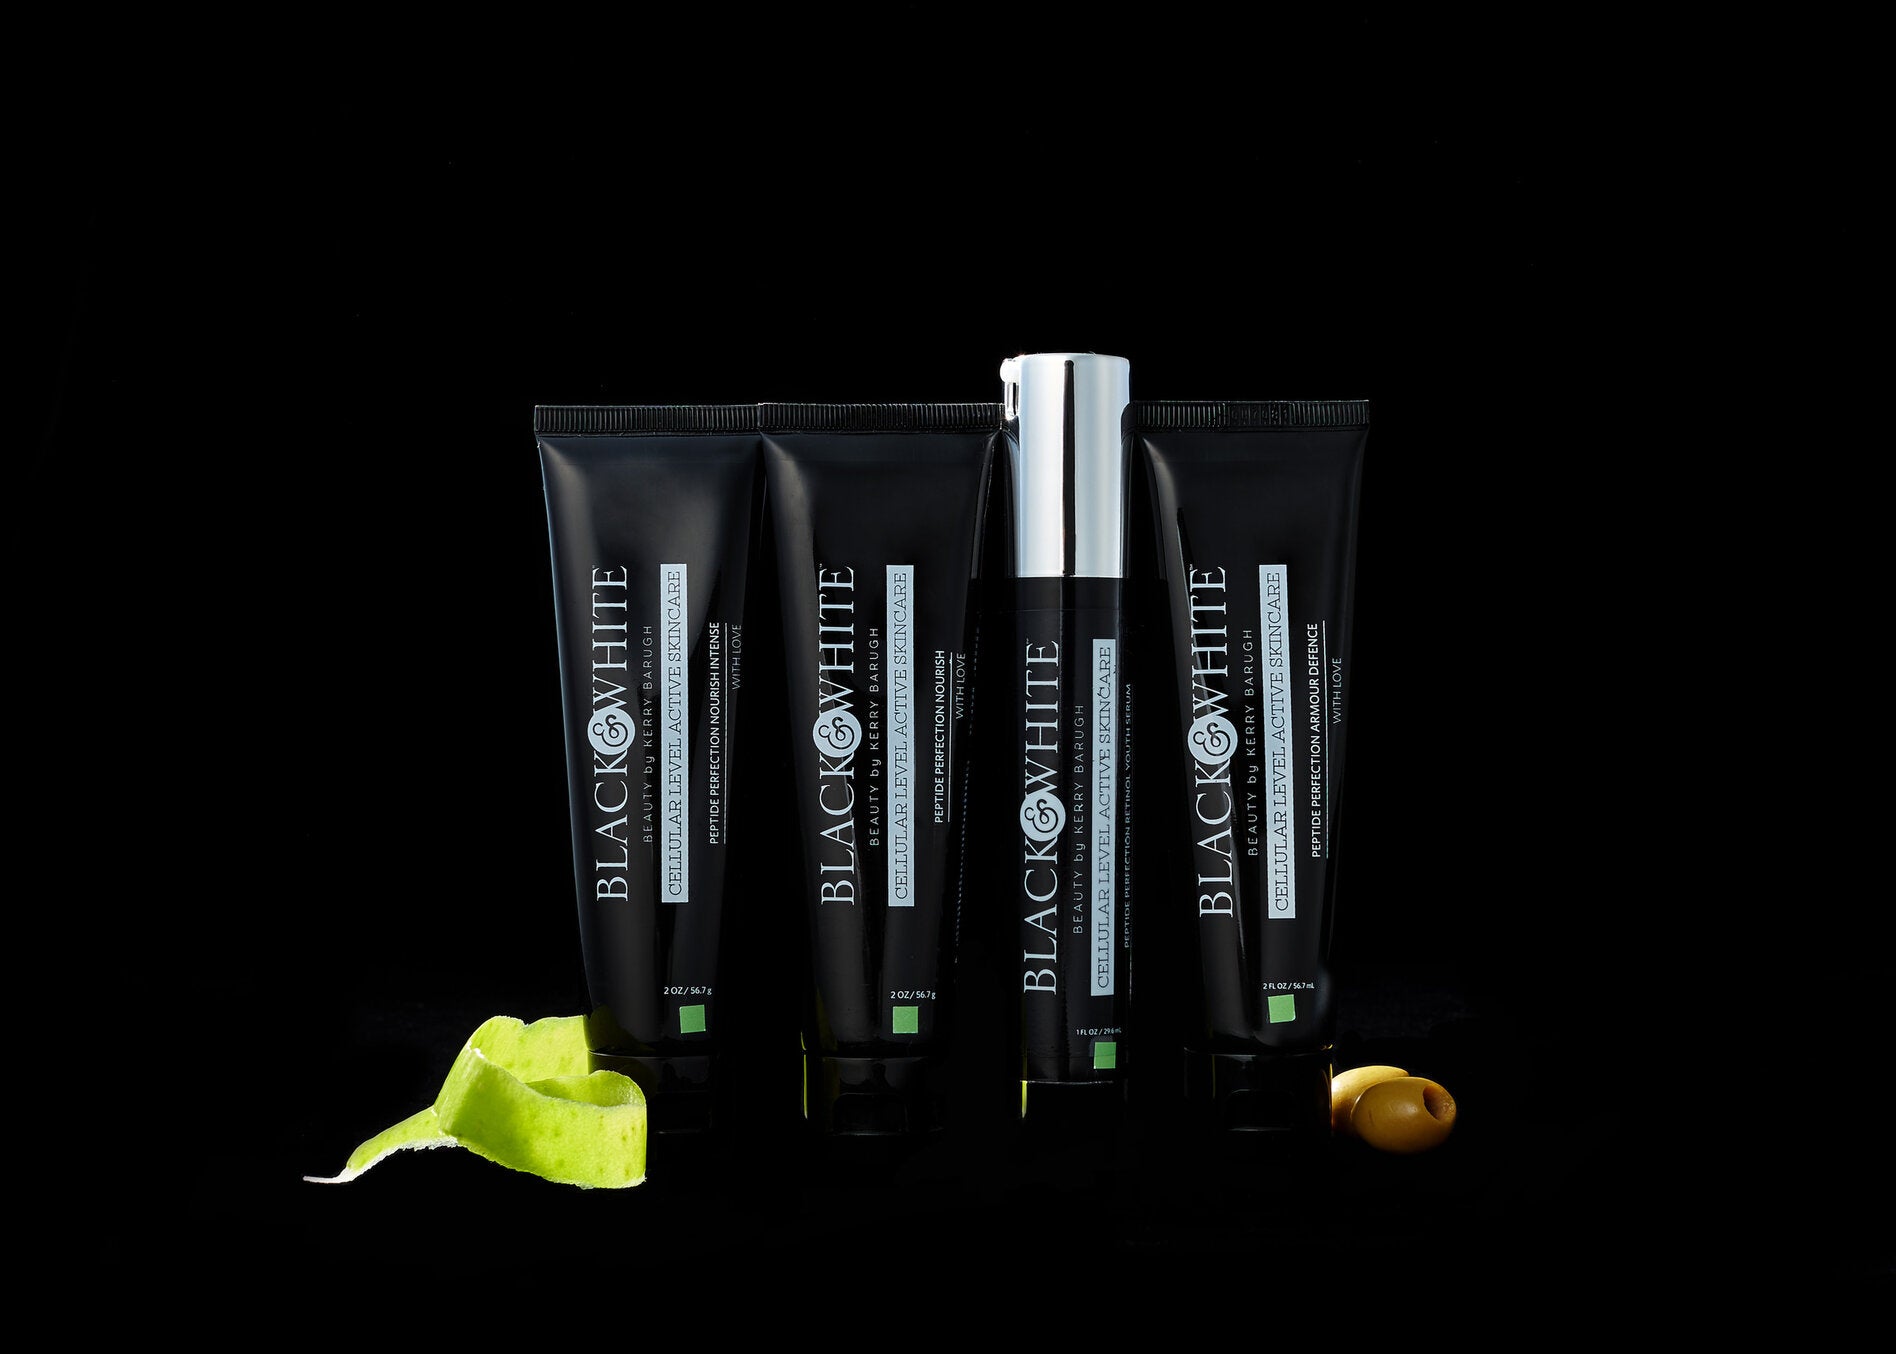 B&W CELLULAR LEVEL PEPTIDE PERFECTION ARMOUR DEFENCE